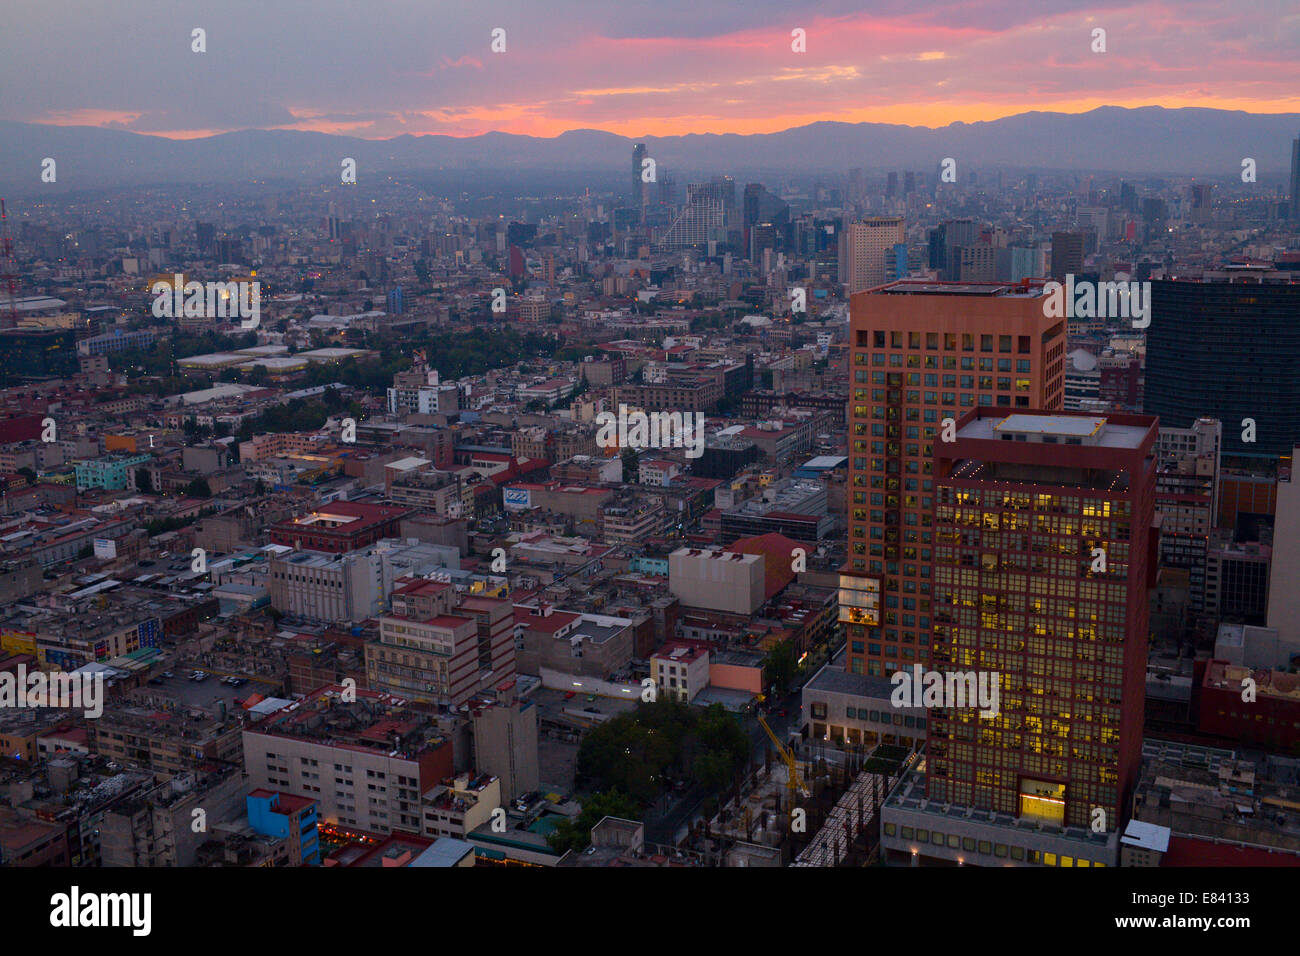 View across of the city at sunset, from Torre Latinoamericana, Mexico City, Federal District, Mexico Stock Photo